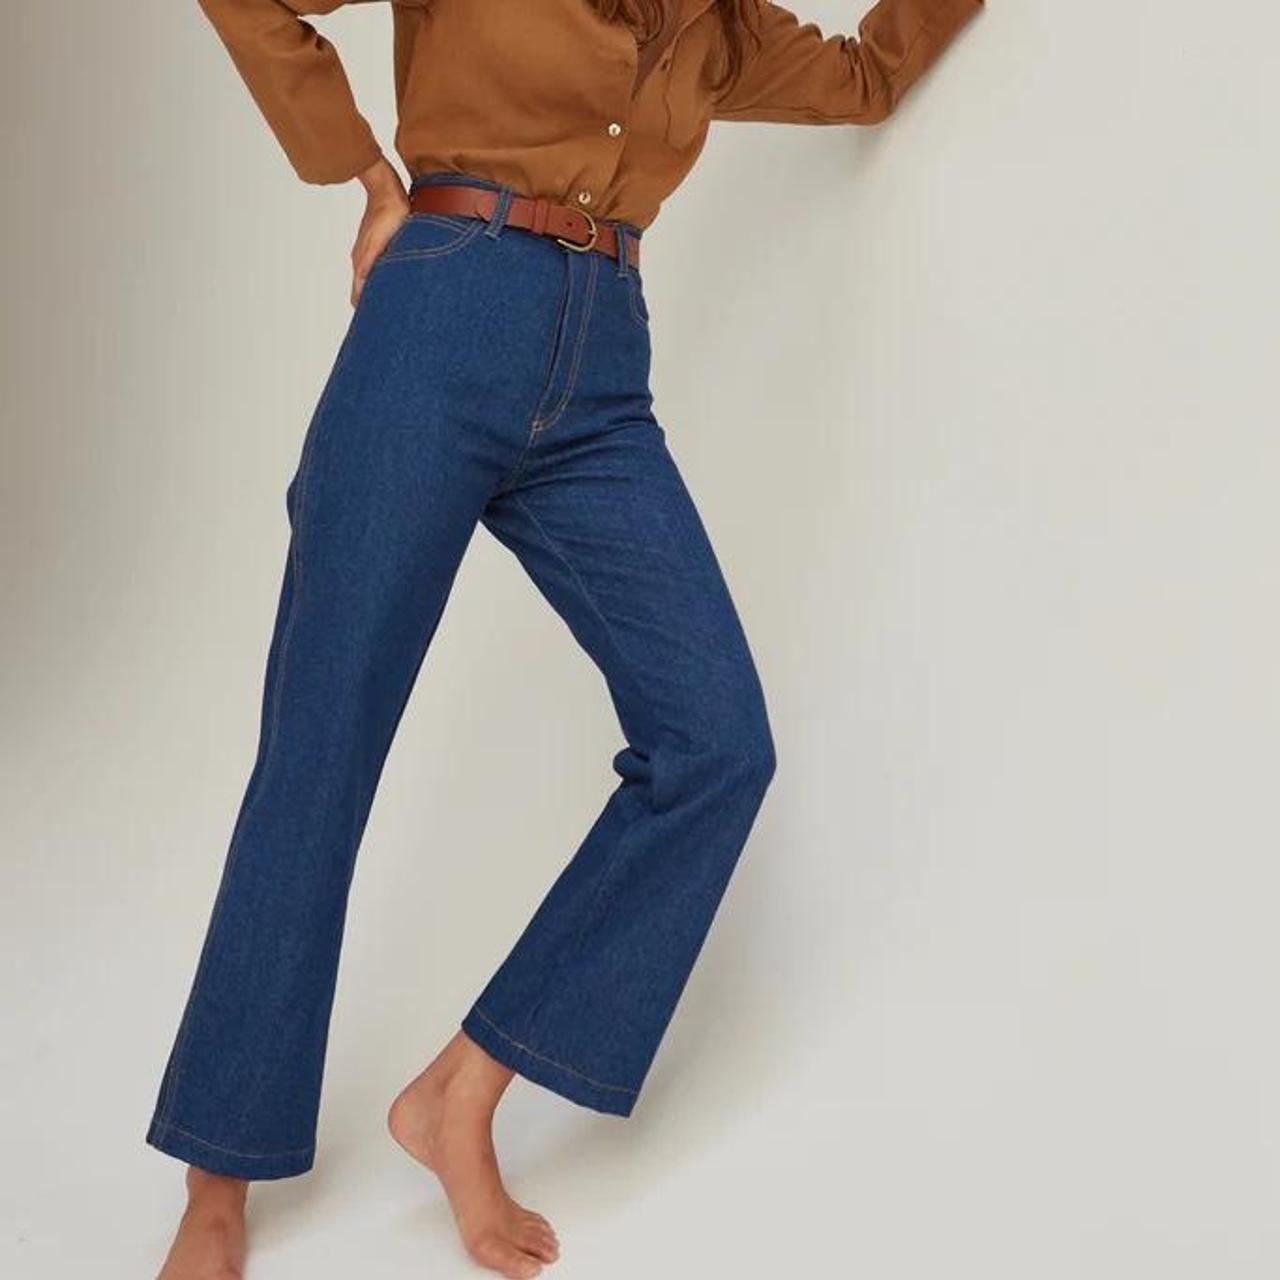 Product Image 1 - Lykke Wullf Cowgirl Jeans size